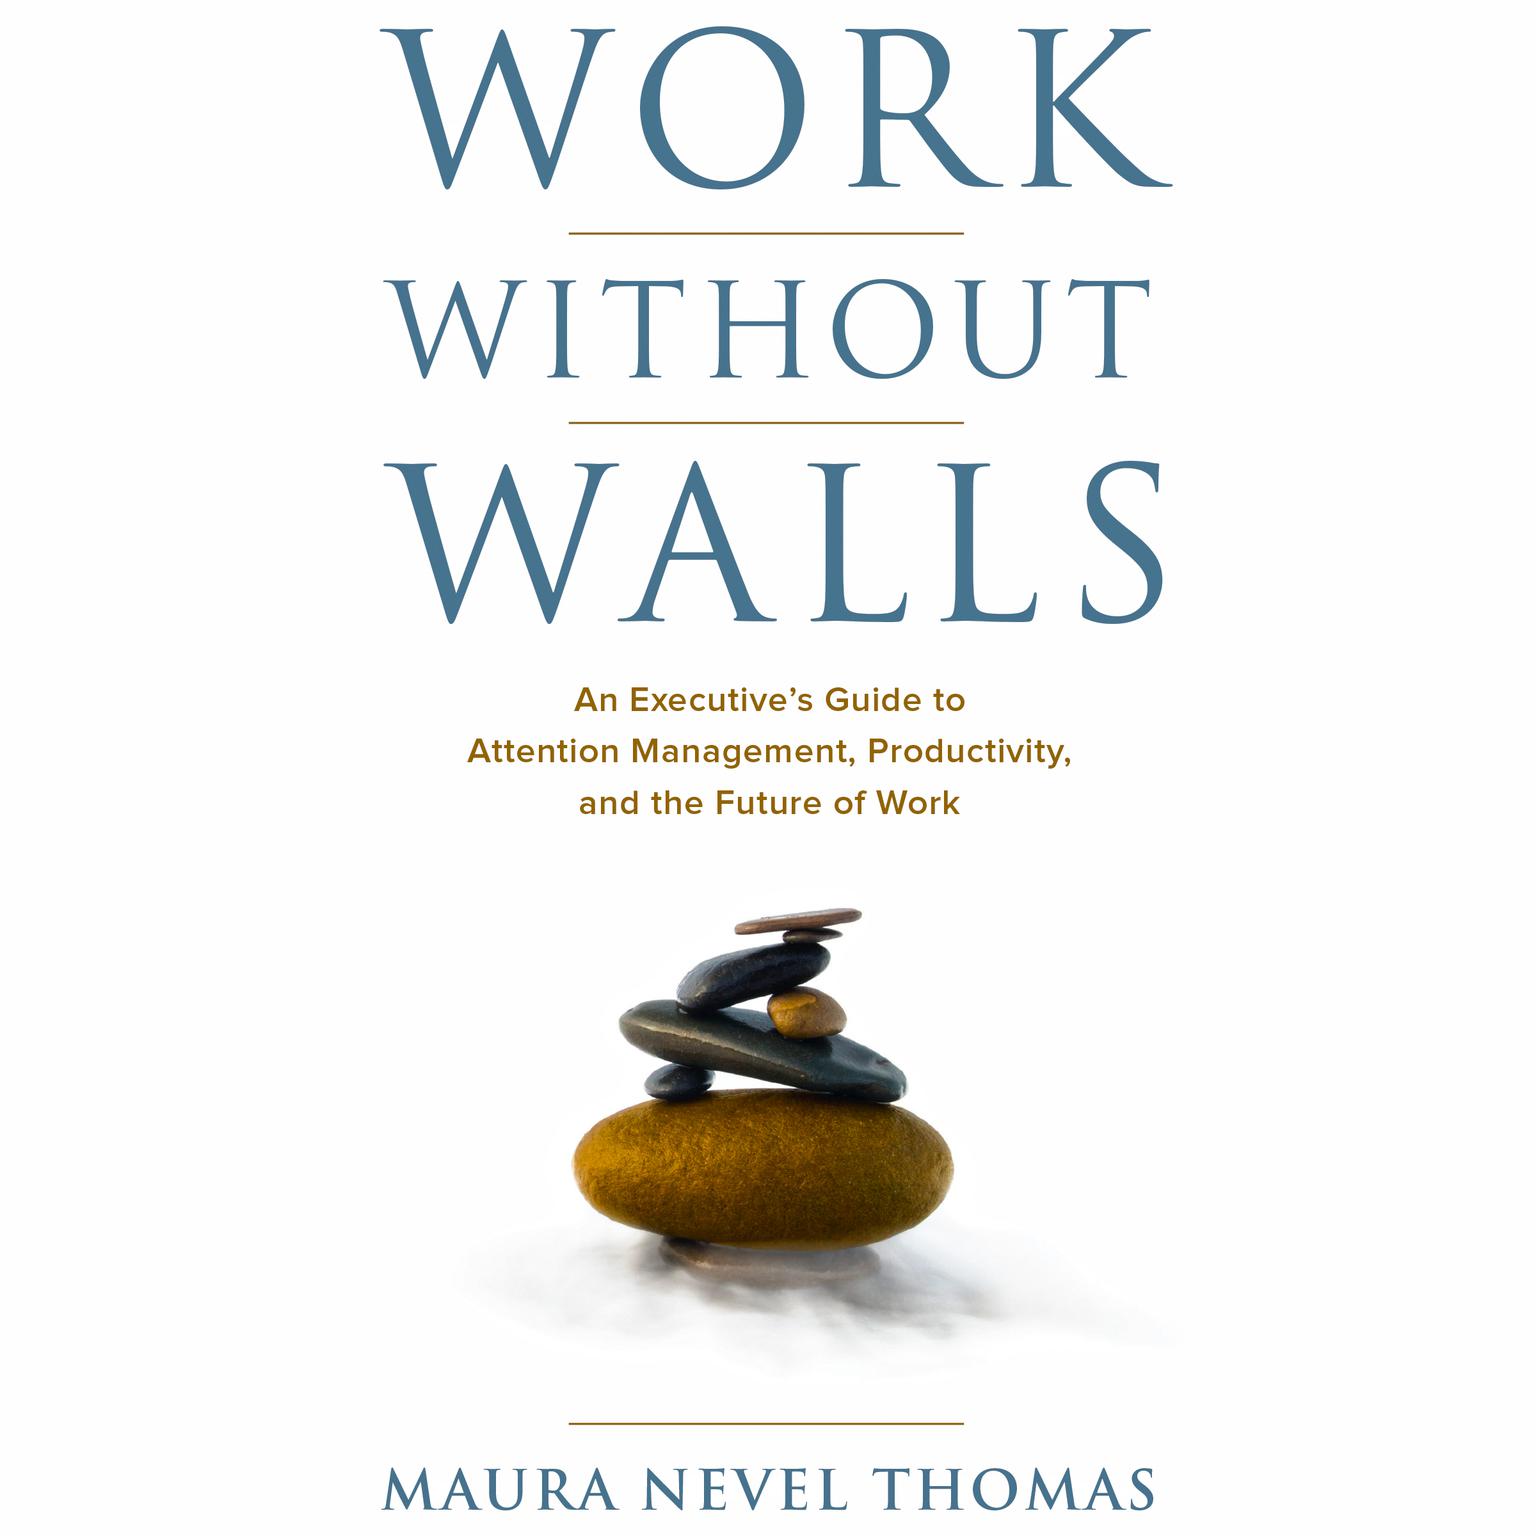 Work Without Walls: An Executive’s Guide to Attention Management, Productivity, and the Future of Work Audiobook, by Maura Nevel Thomas